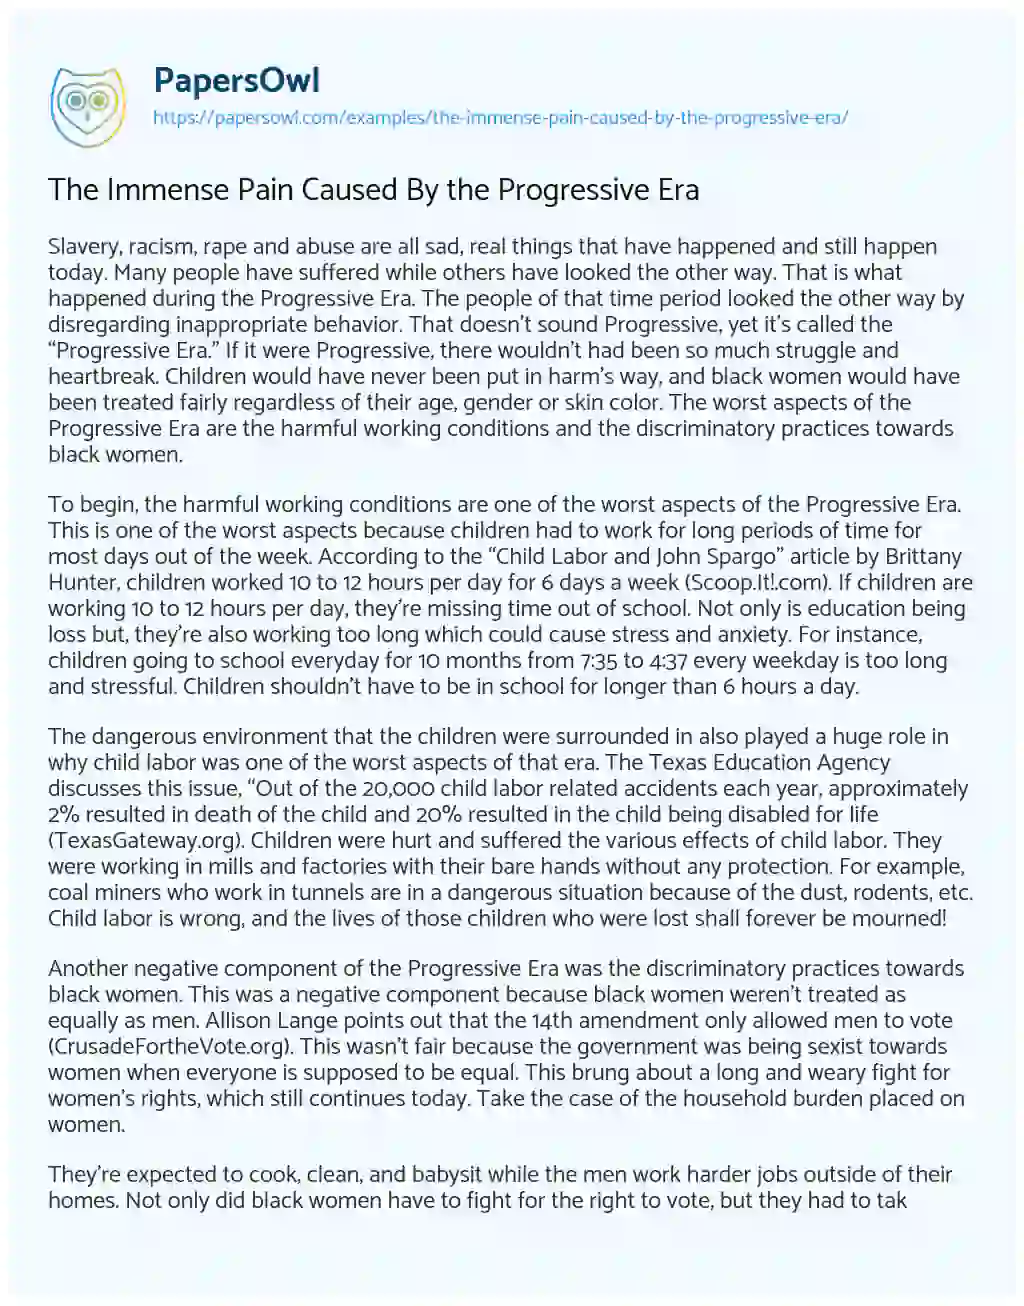 Essay on The Immense Pain Caused by the Progressive Era